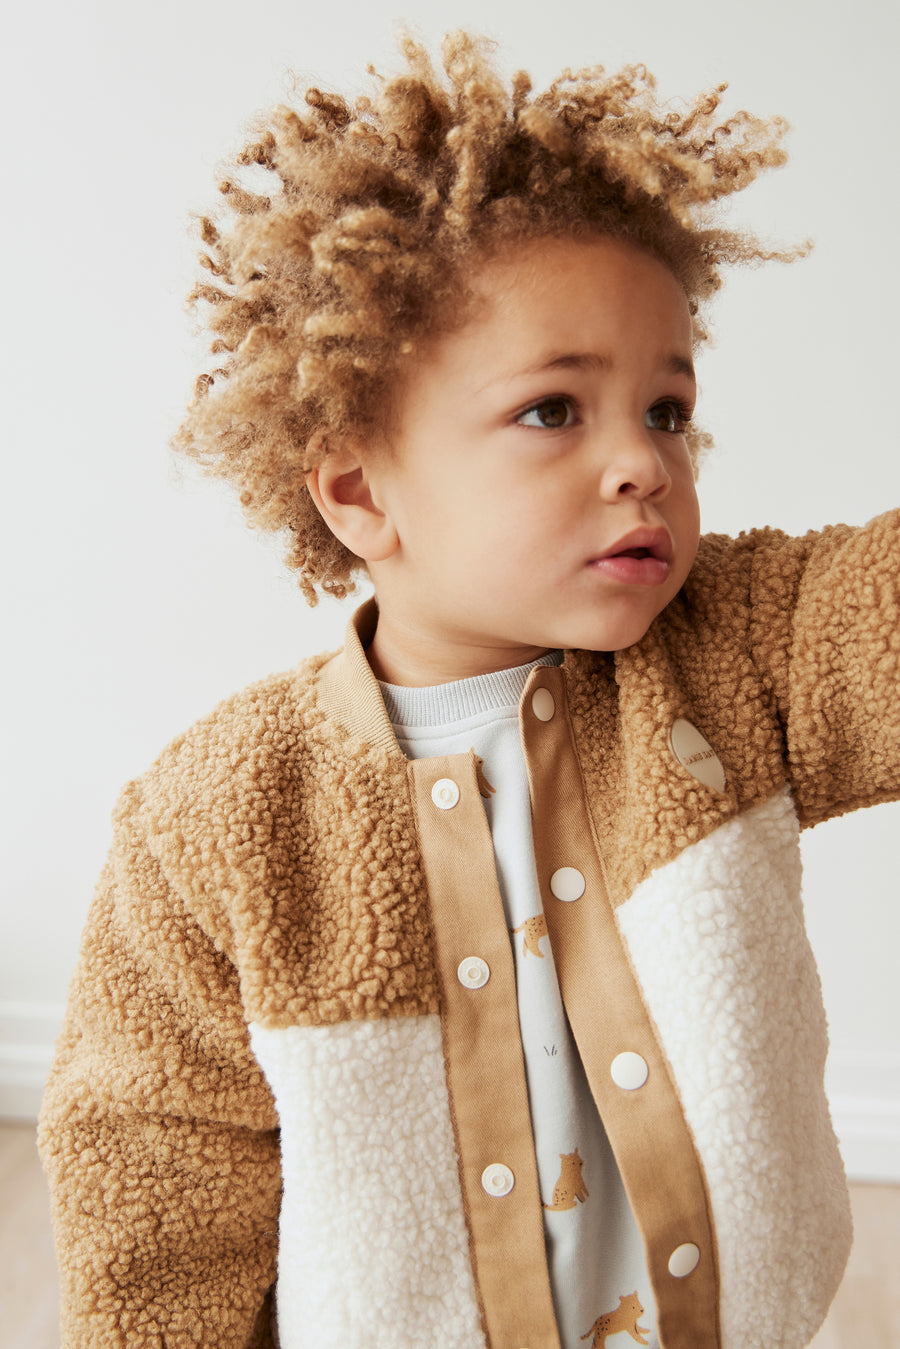 Perry Sherpa Jacket - Natural/Buckwheat Childrens Jacket from Jamie Kay NZ